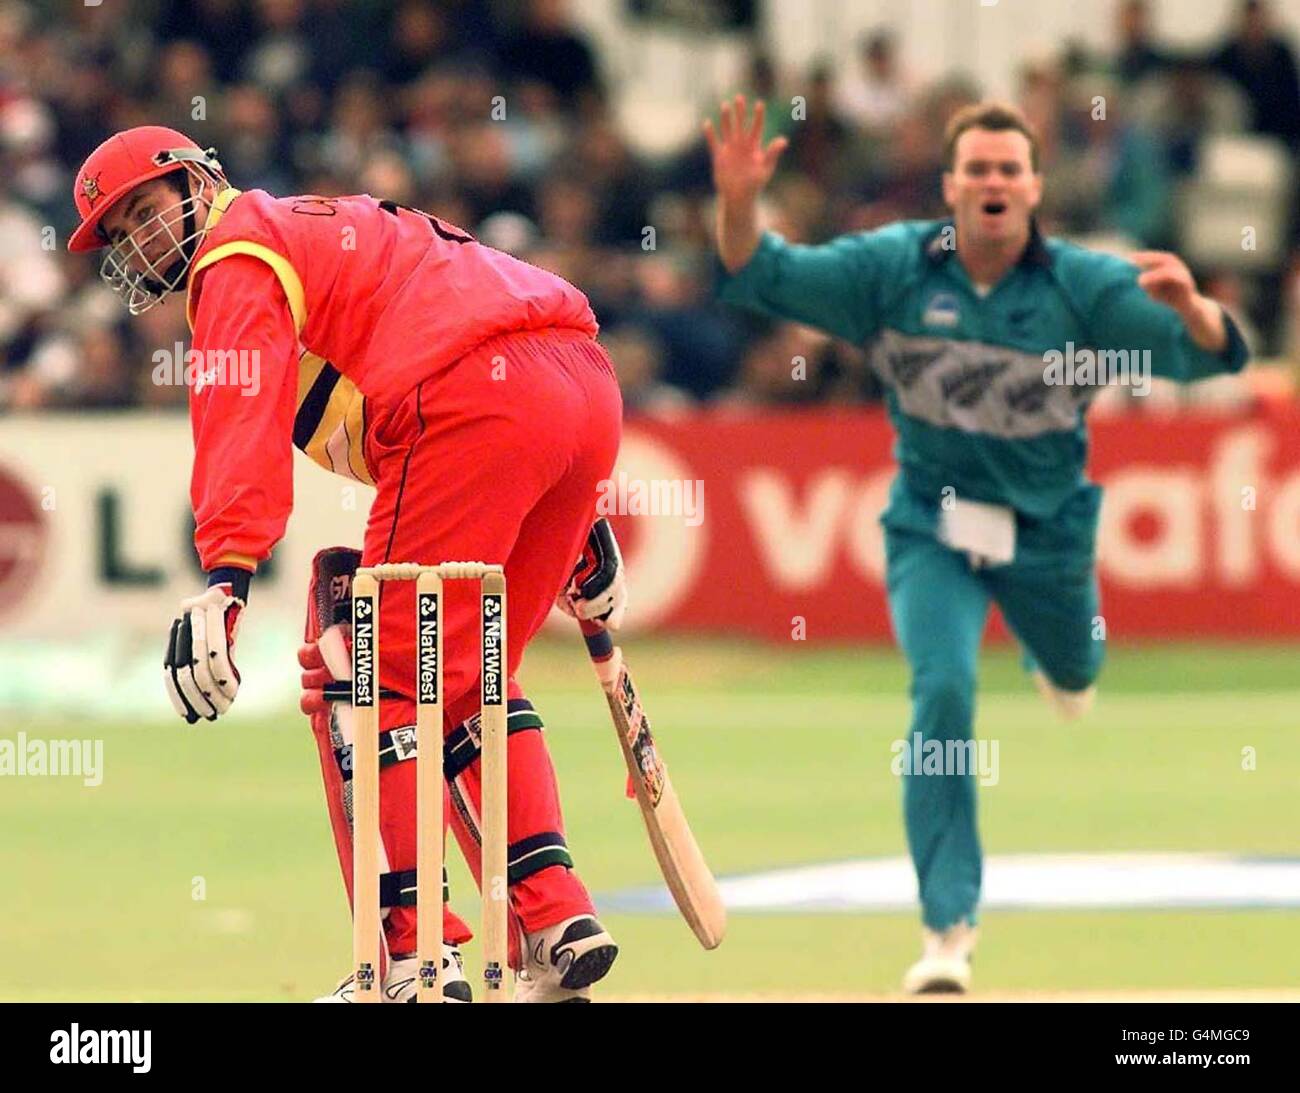 Alistair Campbell the Zimbabwe Cricket Captain (left) watches the ball as New Zealand bowler Dion Nash closes in during their Super Six Cricket World Cup Match at Headingley, Leeds. Stock Photo